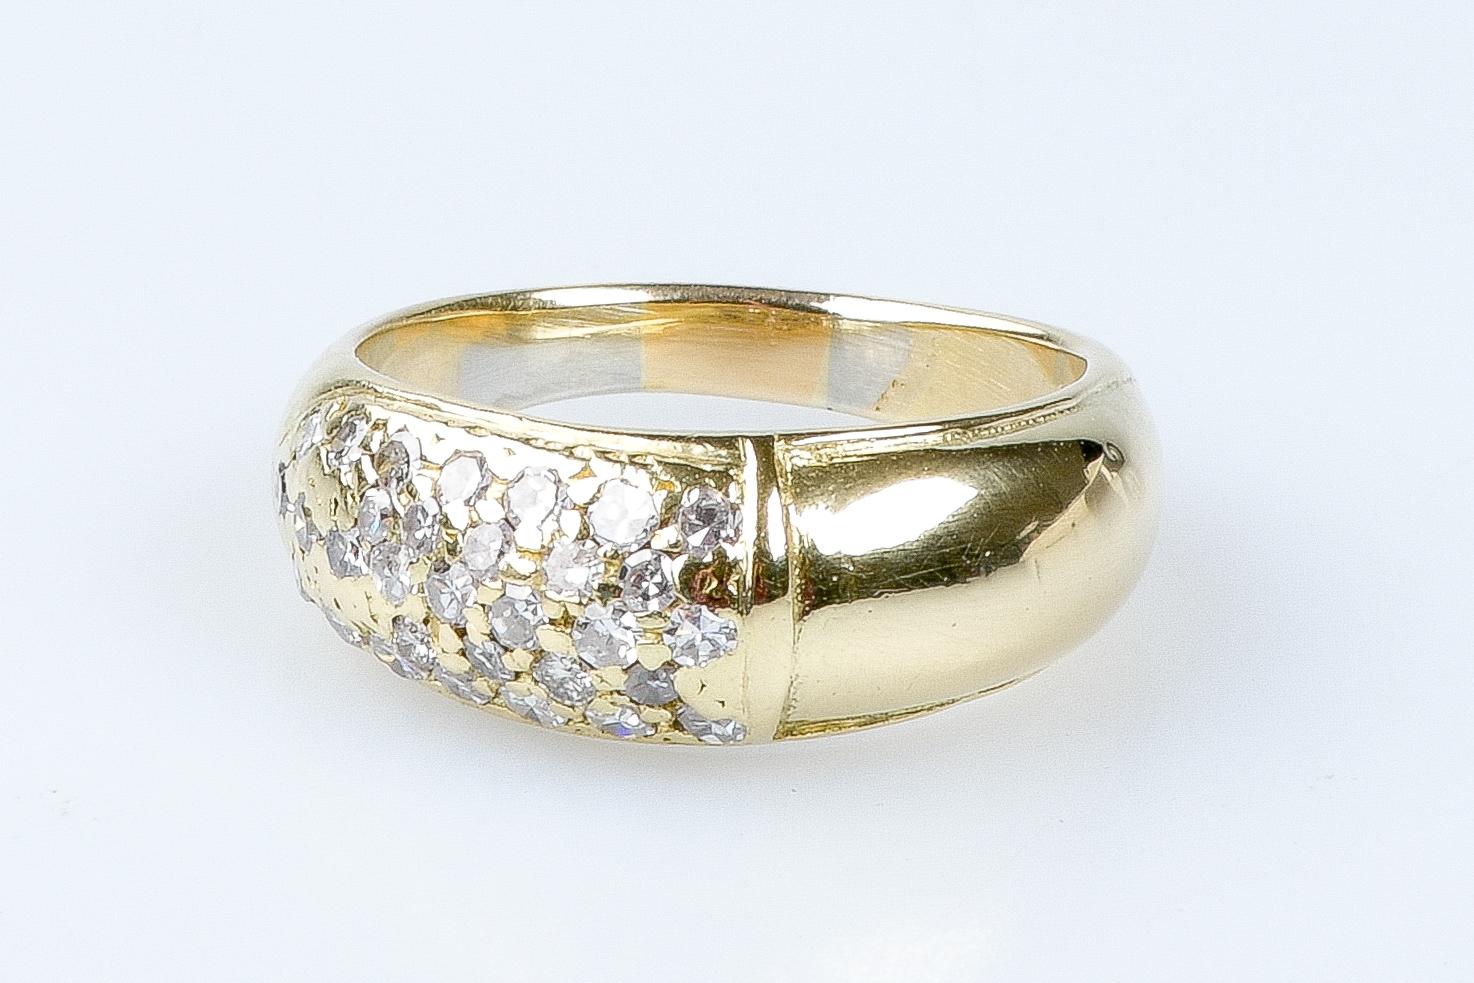 18 carat yellow gold ring designed with a gradation of 31 round brillant cut diamonds, 10 diamonds weighing 0.24 carats, 10 diamonds weighing 0.12 carats and 11 diamonds weighing 0.11 carats.

Quality of the diamond
Color: H
Clarity: SI

Weight :